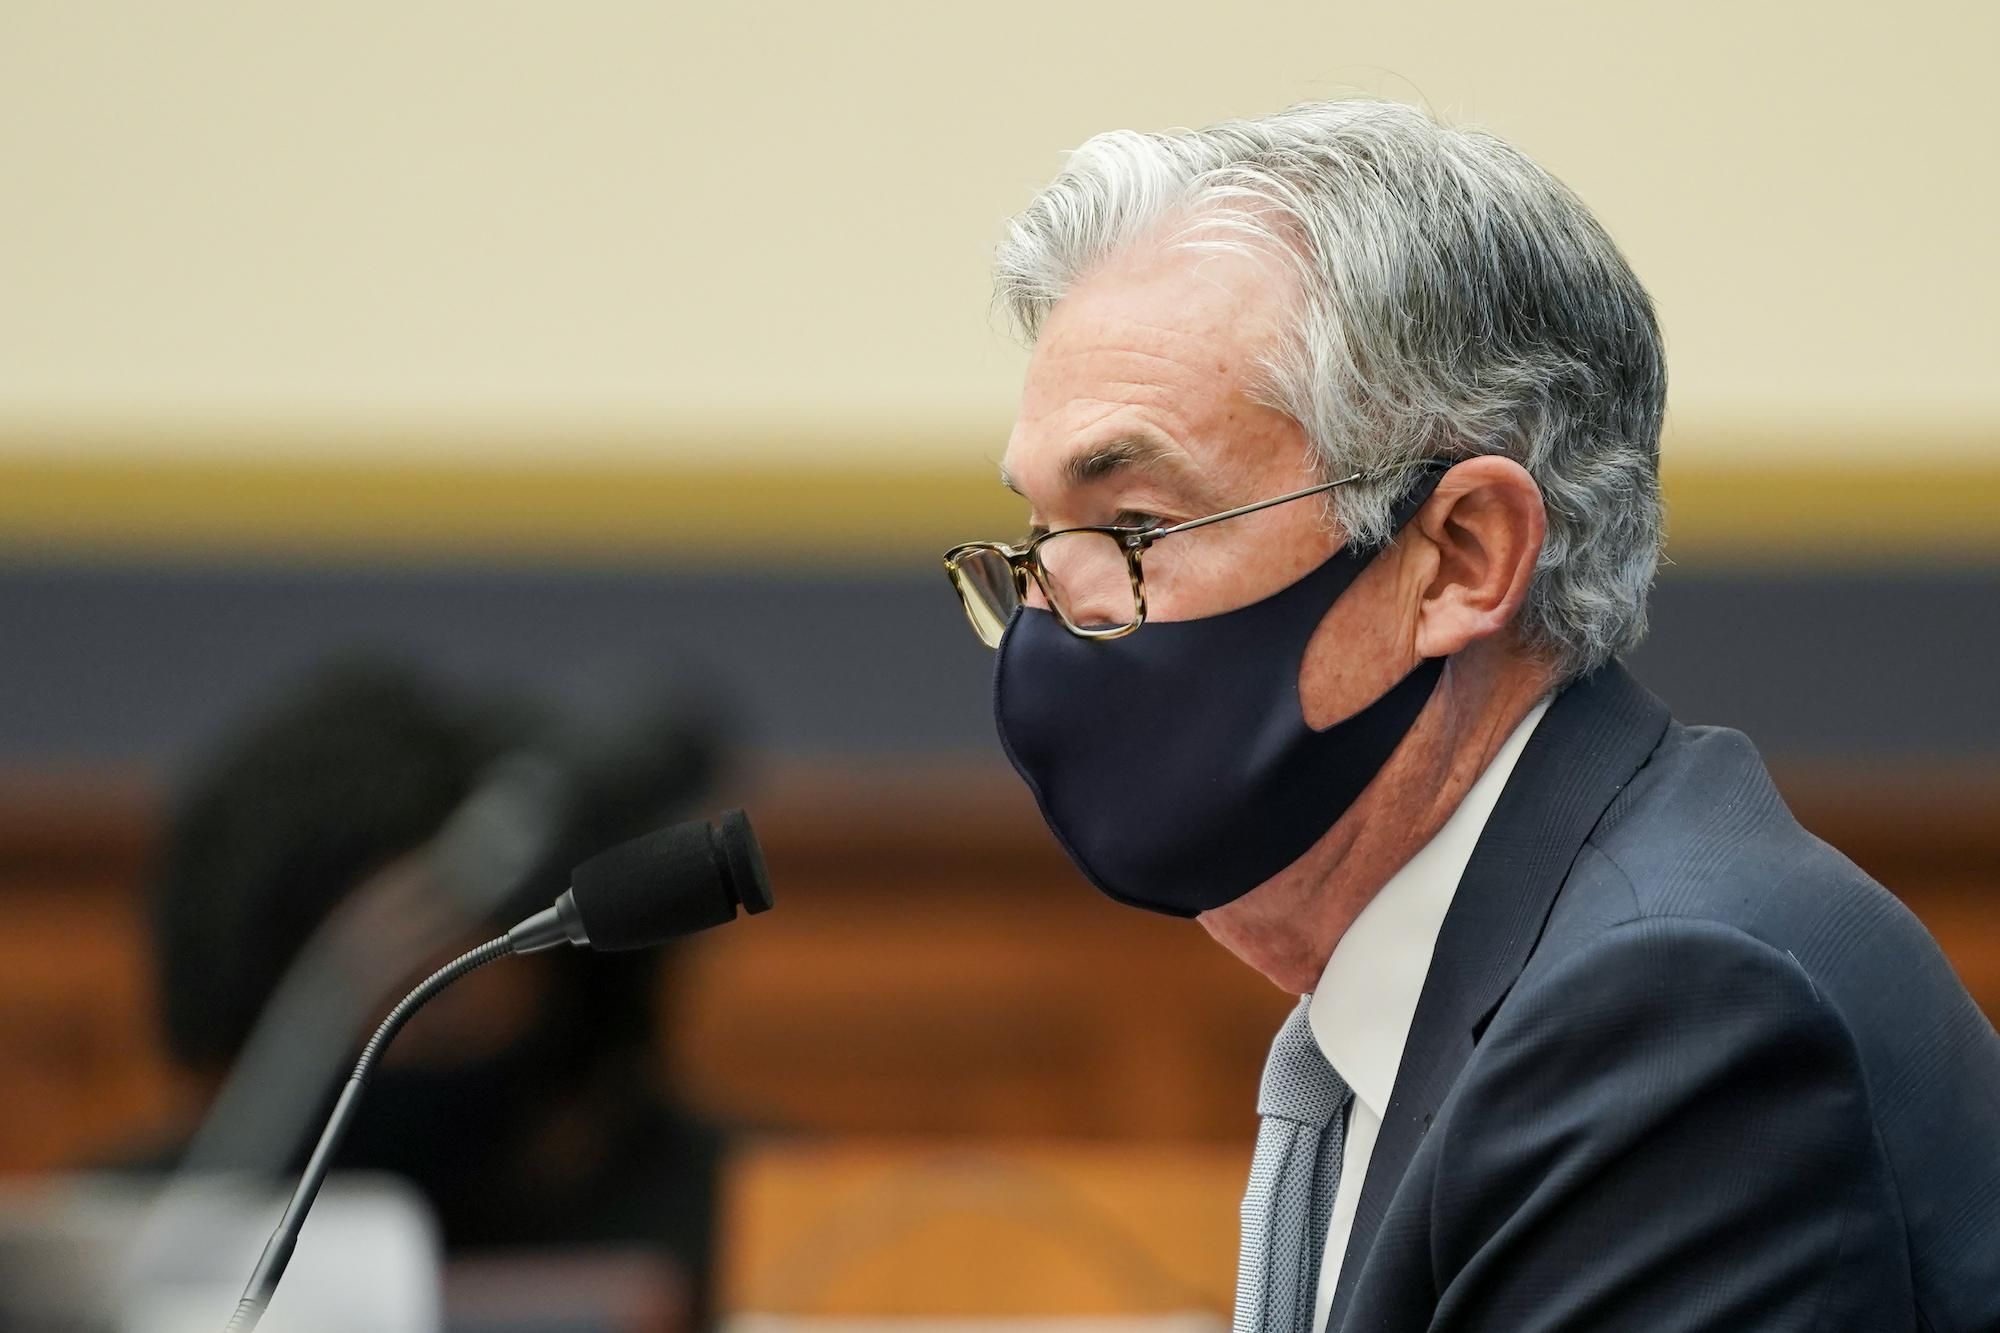 Federal Reserve Chairman Jerome Powell listens to a question during a House Financial Services Committee hearing entitled "Oversight of the Treasury Department's and Federal Reserve's Pandemic Response" in the Rayburn House Office Building in Washington, D.C., on December 2, 2020. 